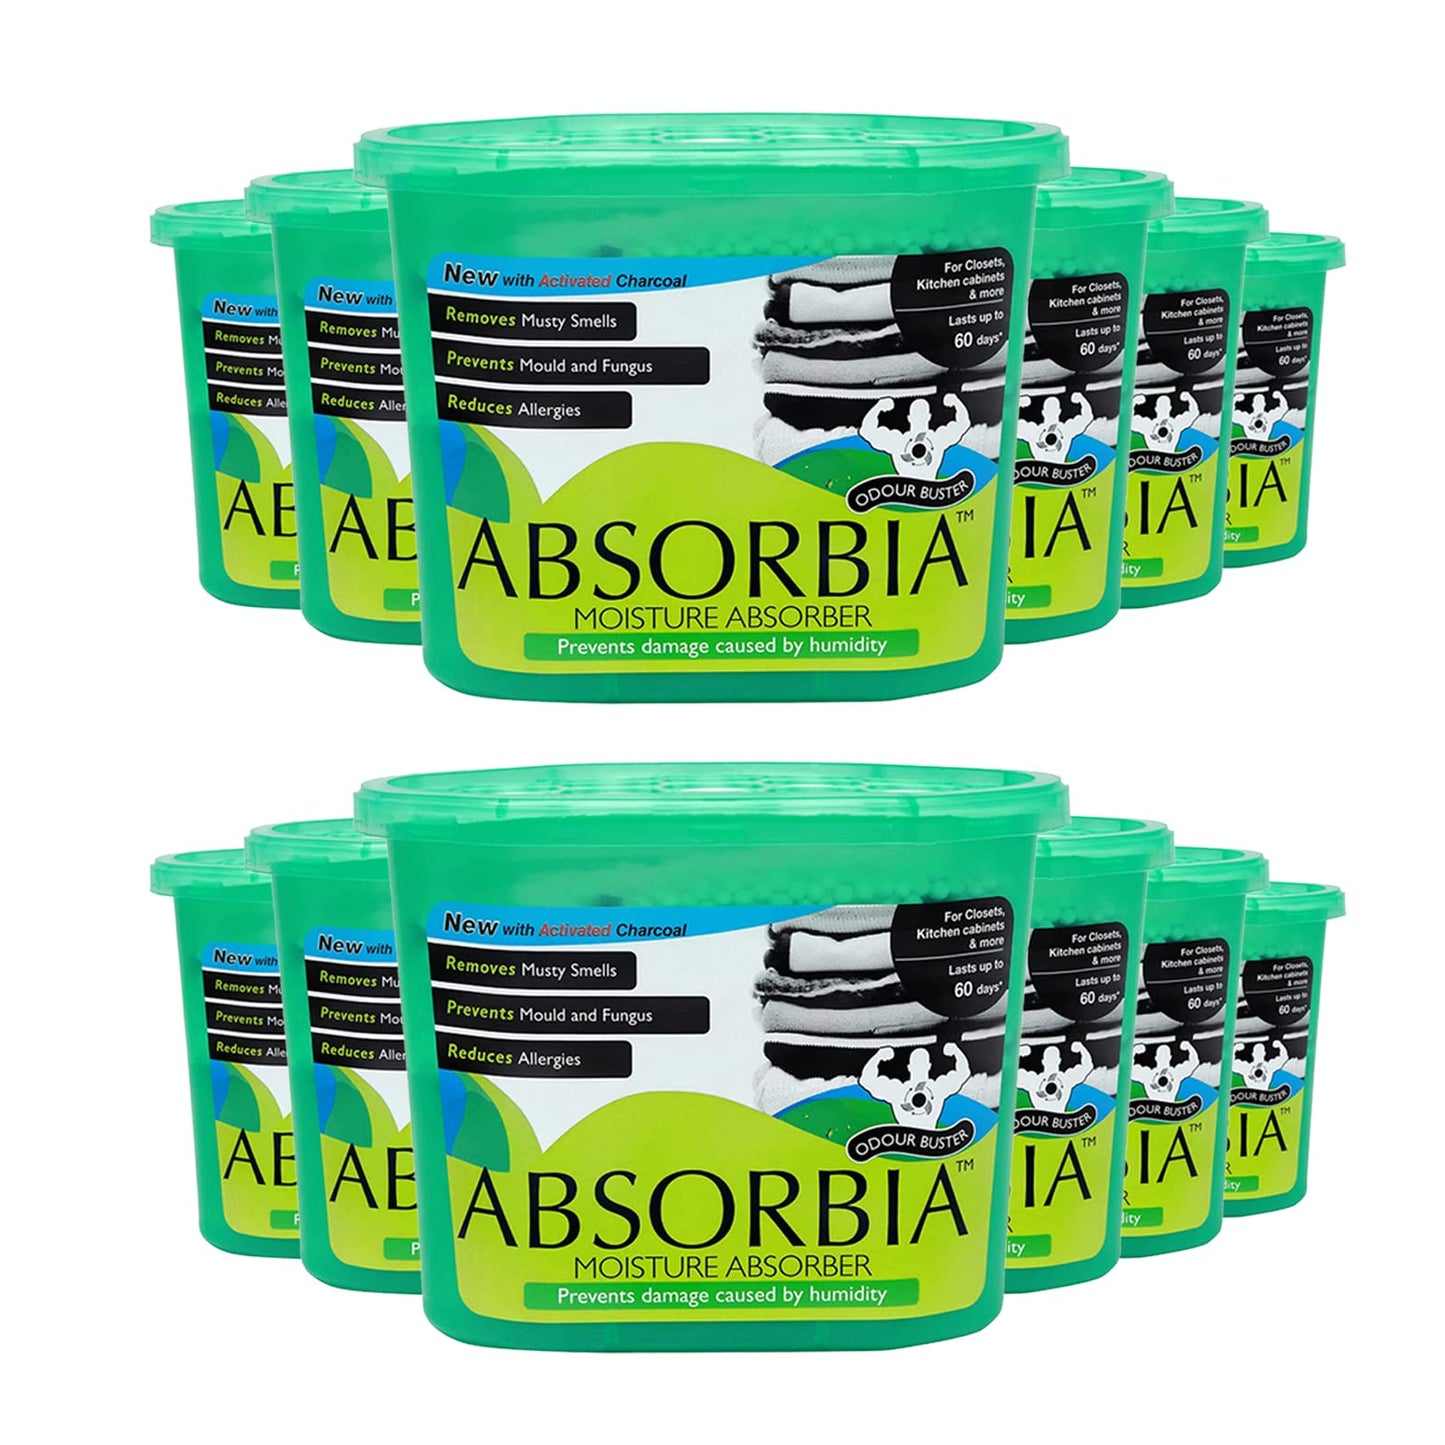 Absorbia Moisture Absorber Odour Buster with Activated Charcoal | Season XL - Pack of 12 (600ml Each)